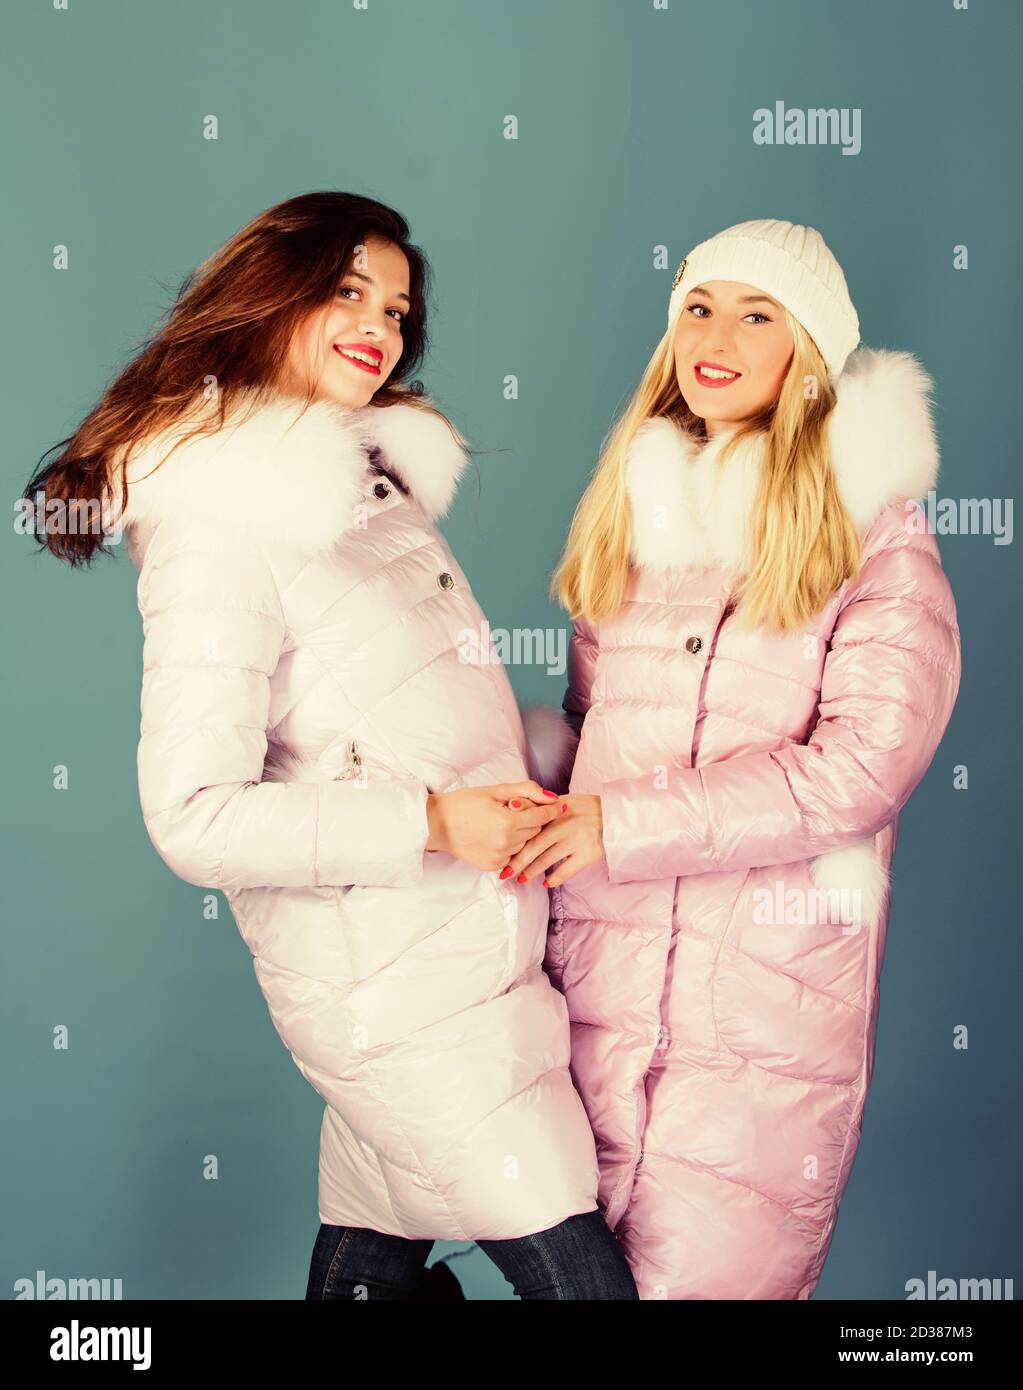 https://c8.alamy.com/comp/2D387M3/fashion-friends-winter-season-soft-fur-for-those-wishing-stay-modern-winter-clothes-women-wear-down-jacket-with-furry-hood-girls-smiling-makeup-faces-wear-winter-jackets-blue-background-2D387M3.jpg